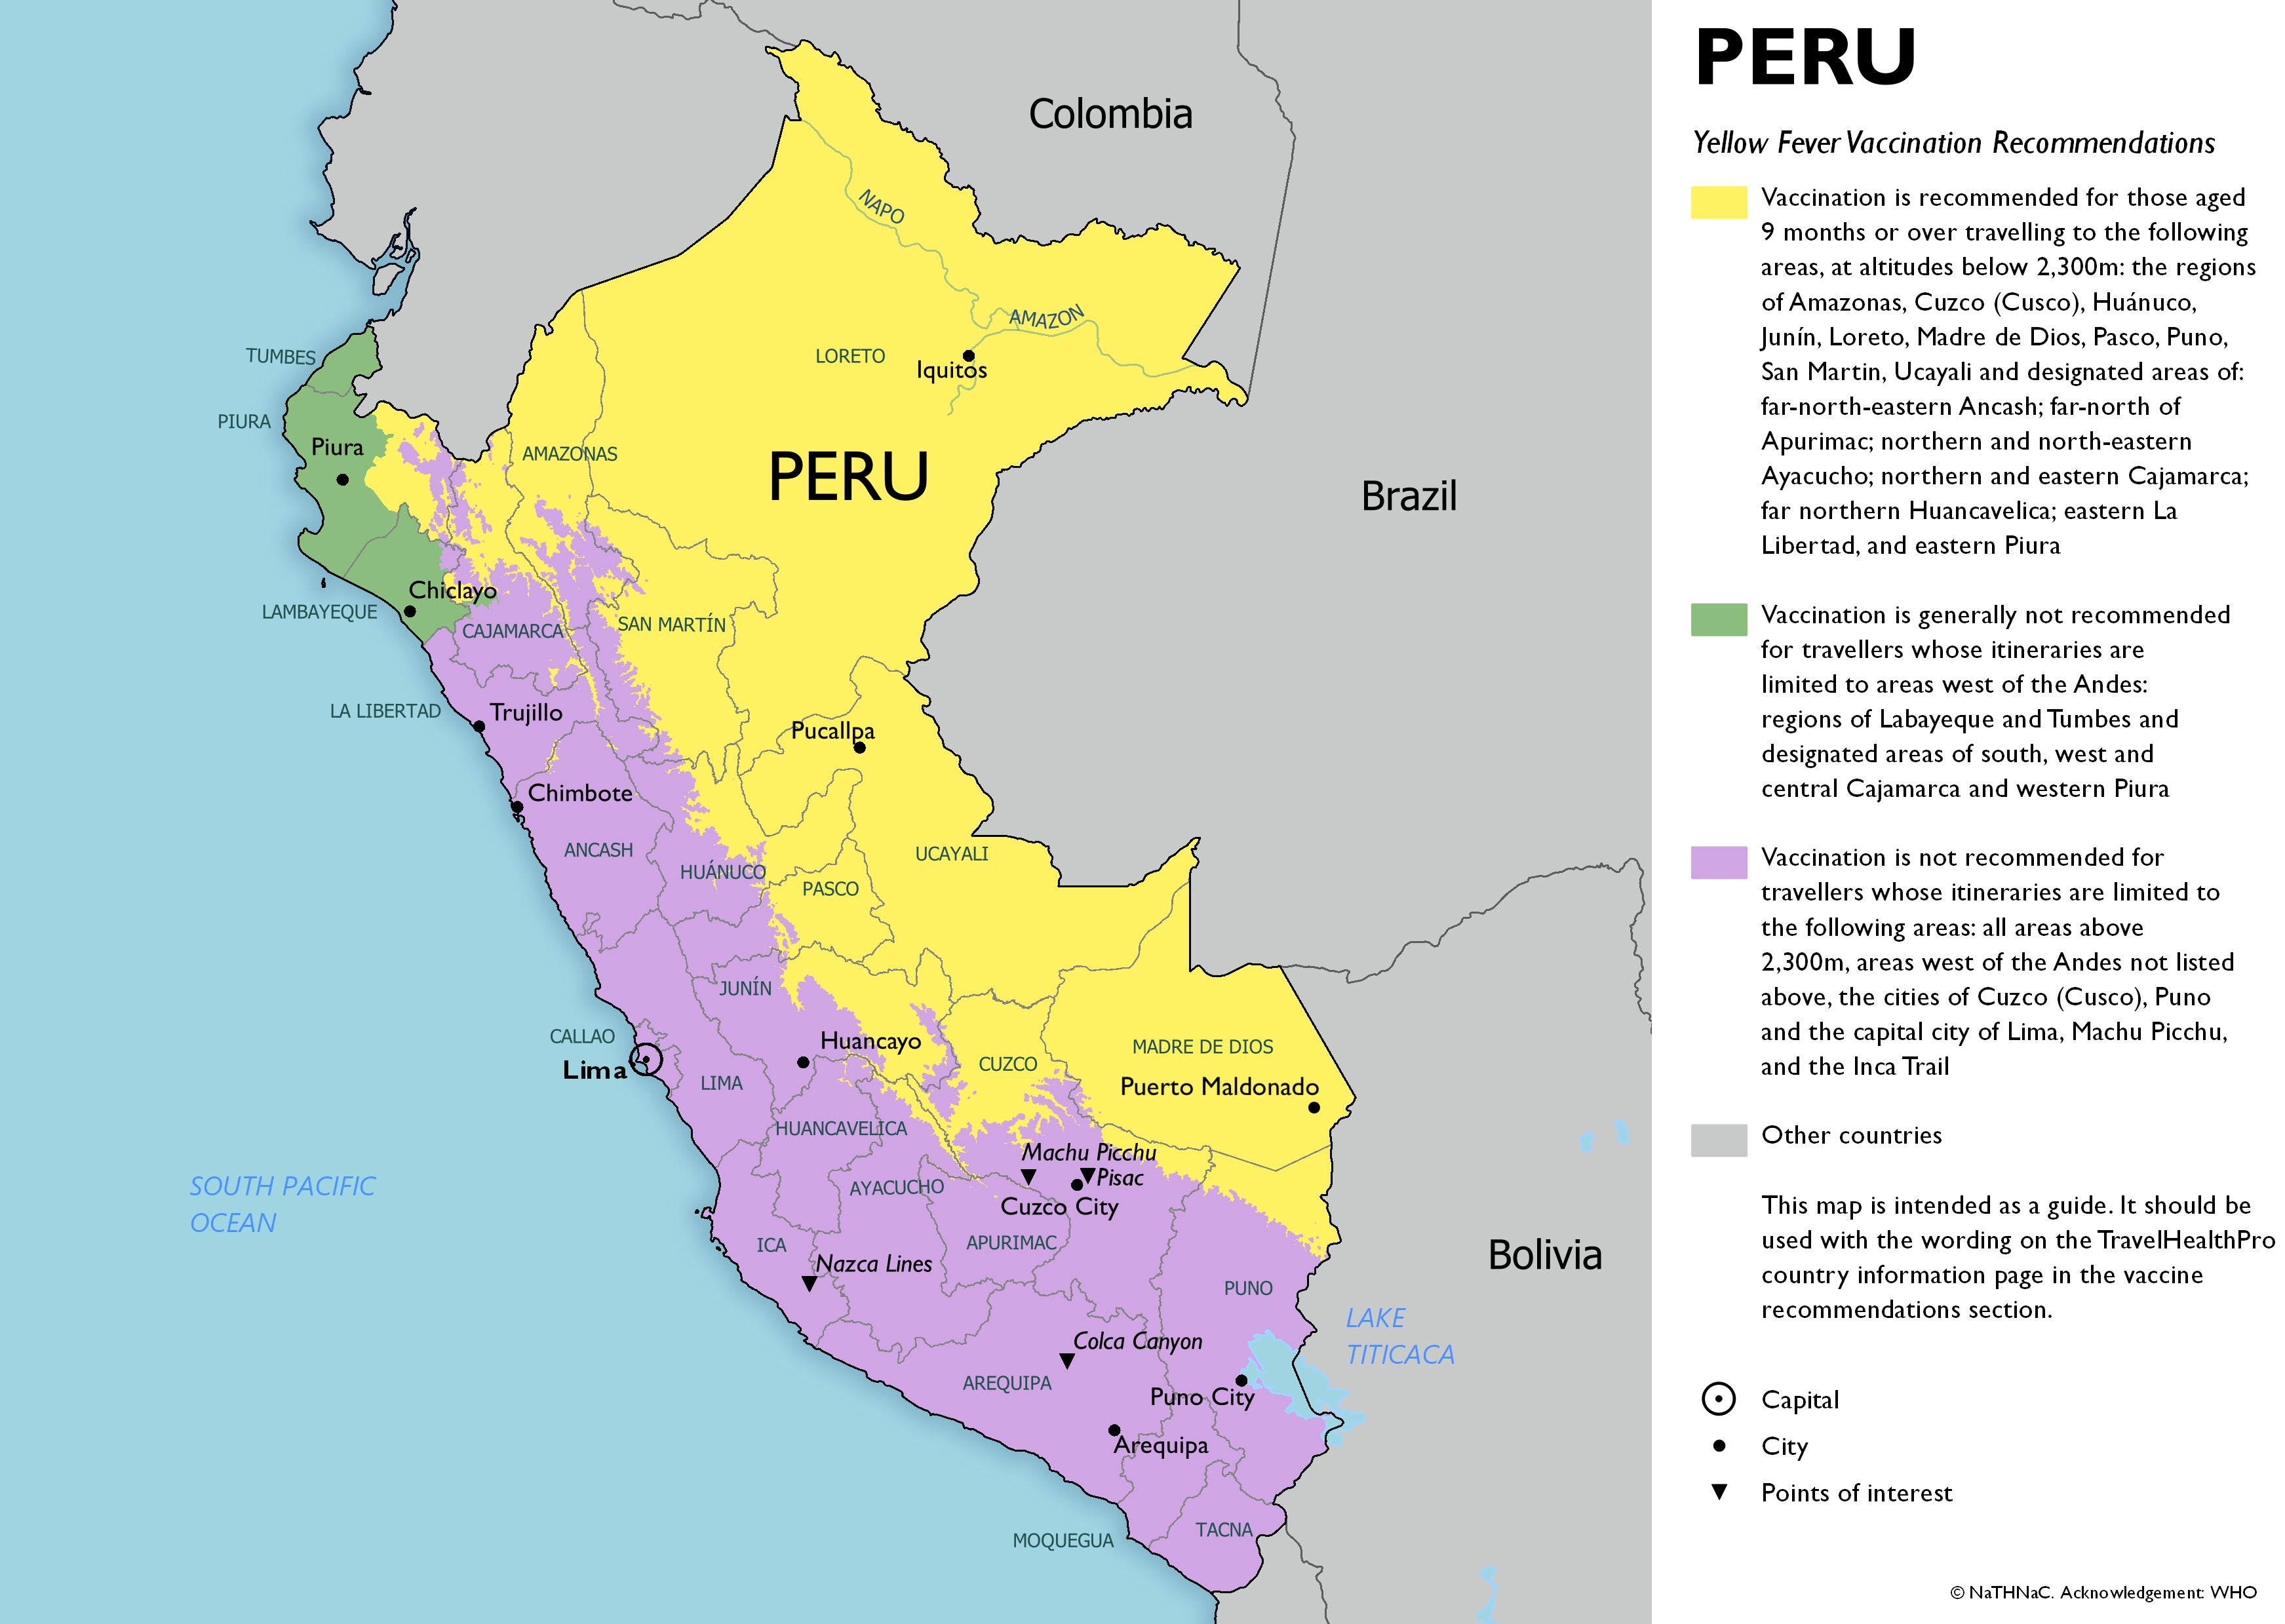 Yellow fever vaccine recommendation map for Peru